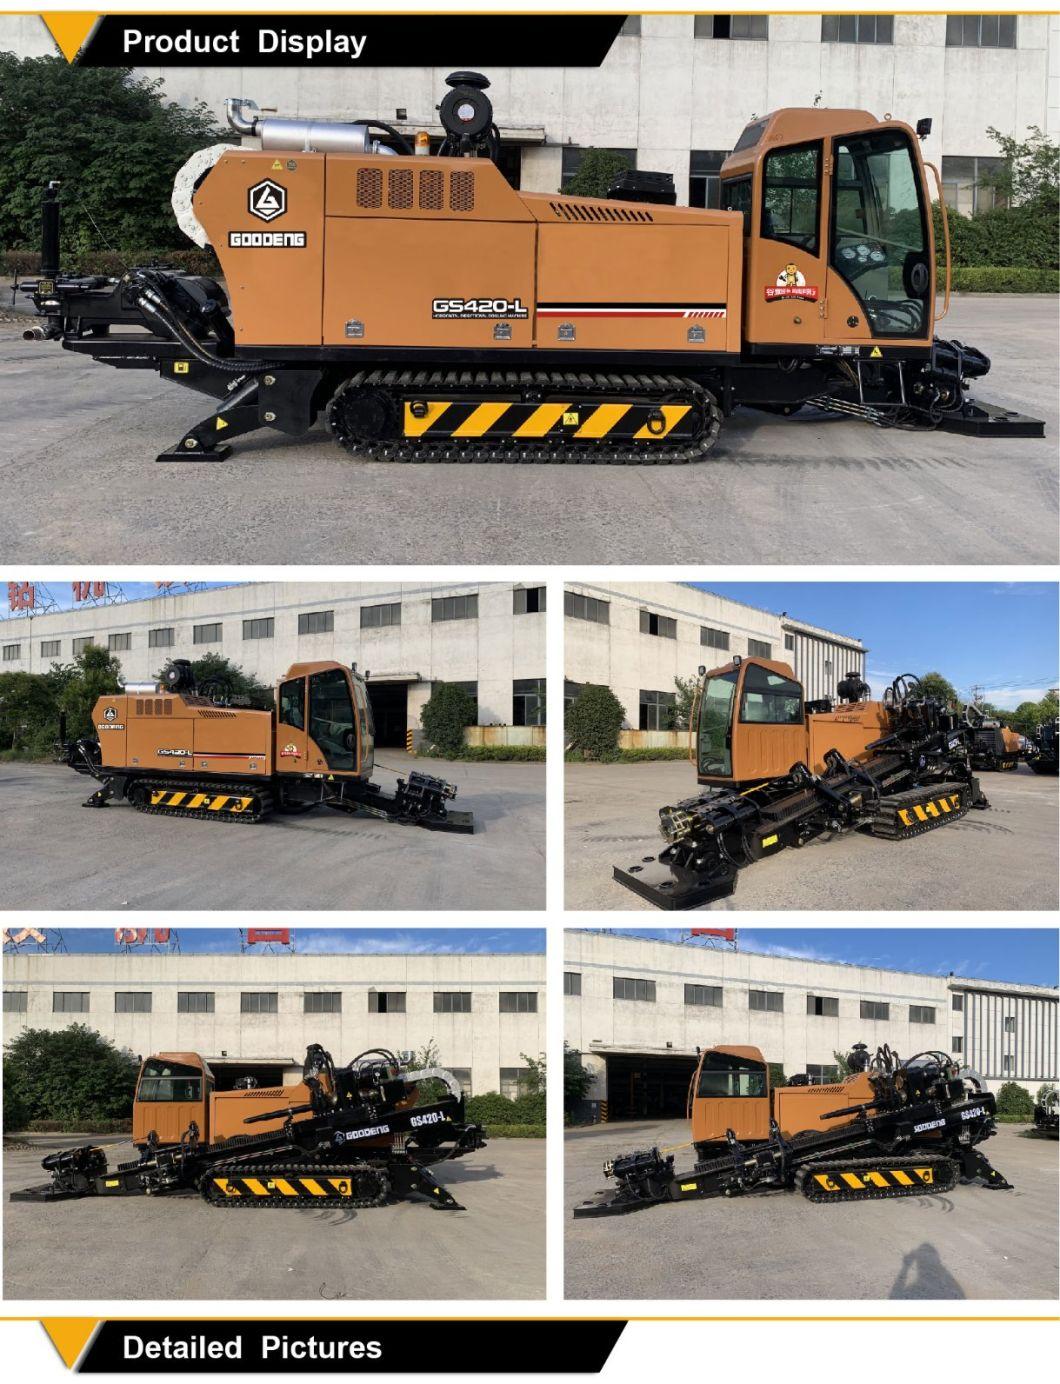 GS420-LS trenchless machine Goodeng 42ton horizontal directional drilling rig